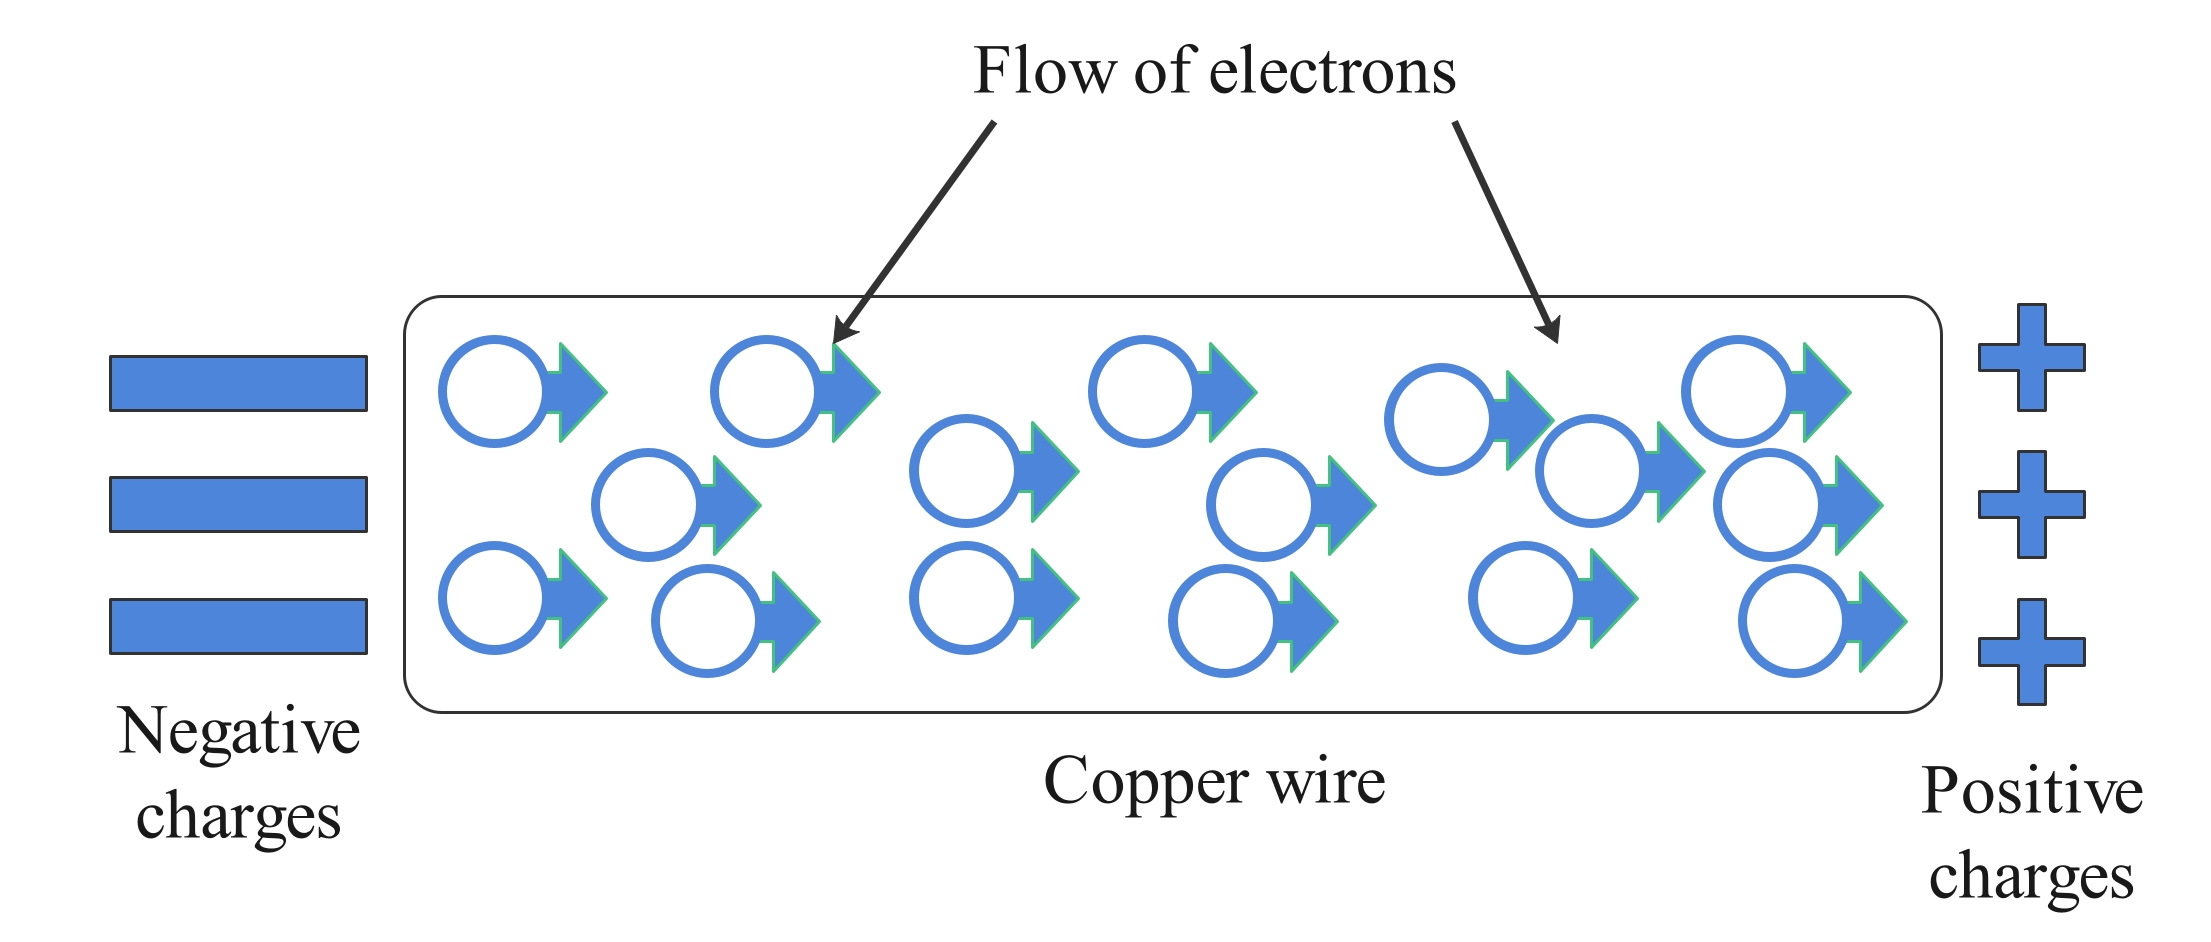 Flow of electrons